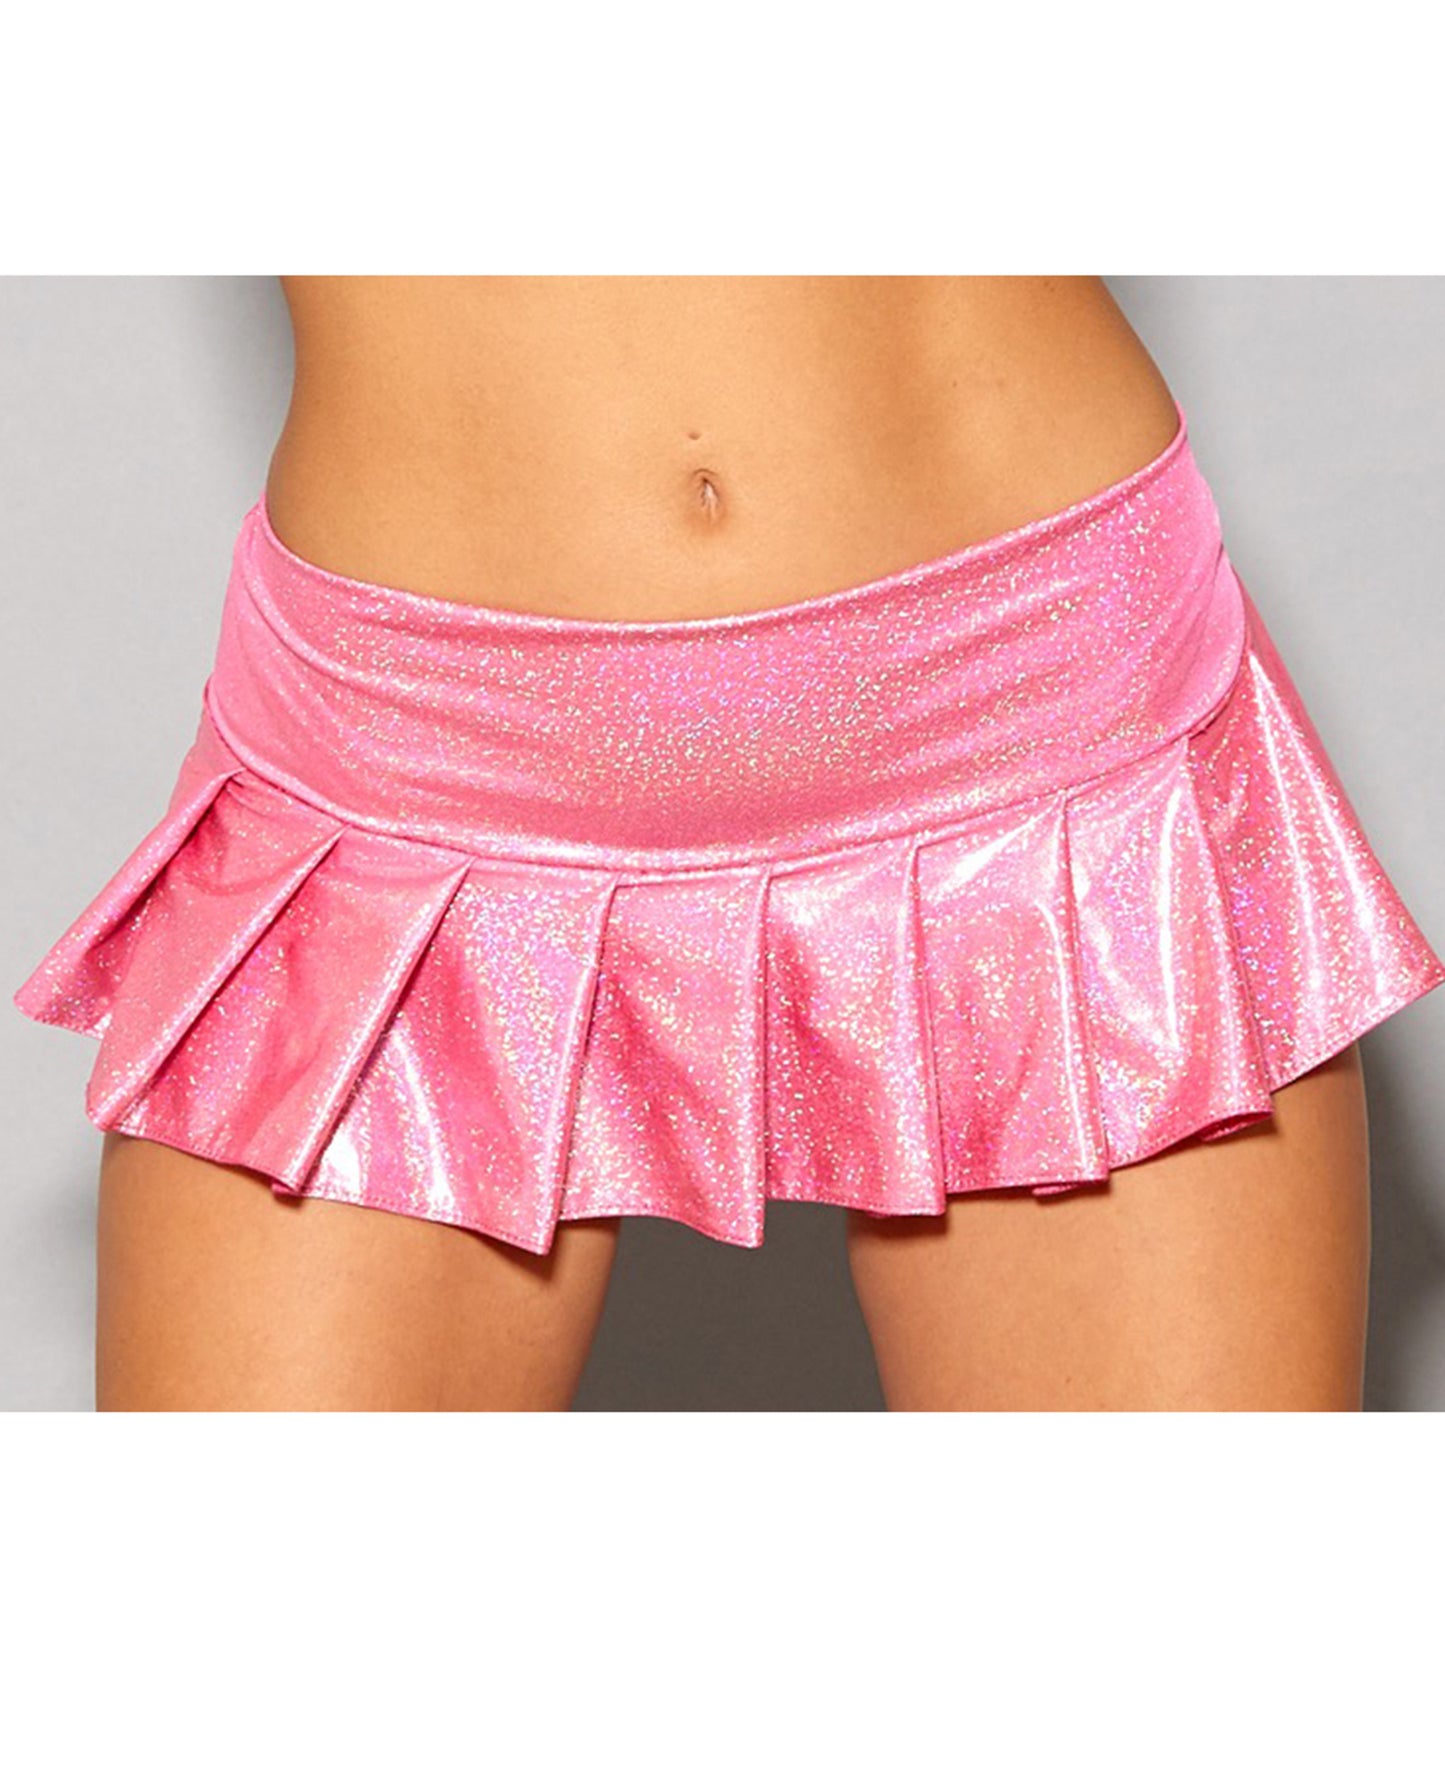 2092 Pleated Mini Skirt Pink front view